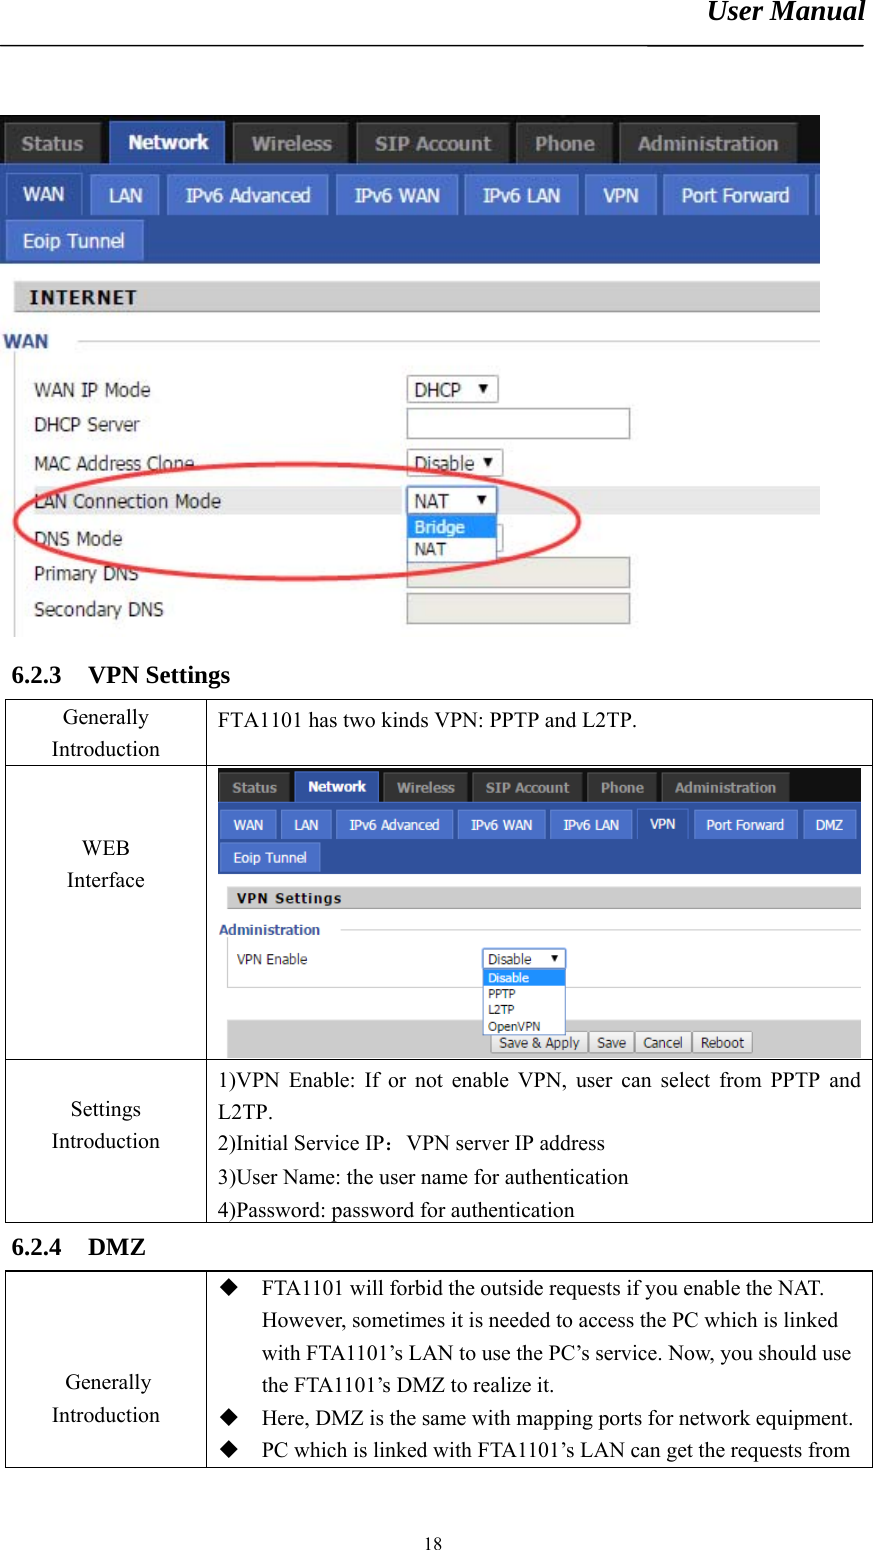 User Manual       18 6.2.3 VPN Settings Generally Introduction FTA1101 has two kinds VPN: PPTP and L2TP.   WEB Interface   Settings Introduction  1)VPN Enable: If or not enable VPN, user can select from PPTP and L2TP. 2)Initial Service IP：VPN server IP address 3)User Name: the user name for authentication 4)Password: password for authentication 6.2.4 DMZ   Generally Introduction  FTA1101 will forbid the outside requests if you enable the NAT. However, sometimes it is needed to access the PC which is linked with FTA1101’s LAN to use the PC’s service. Now, you should use the FTA1101’s DMZ to realize it.    Here, DMZ is the same with mapping ports for network equipment. PC which is linked with FTA1101’s LAN can get the requests from 